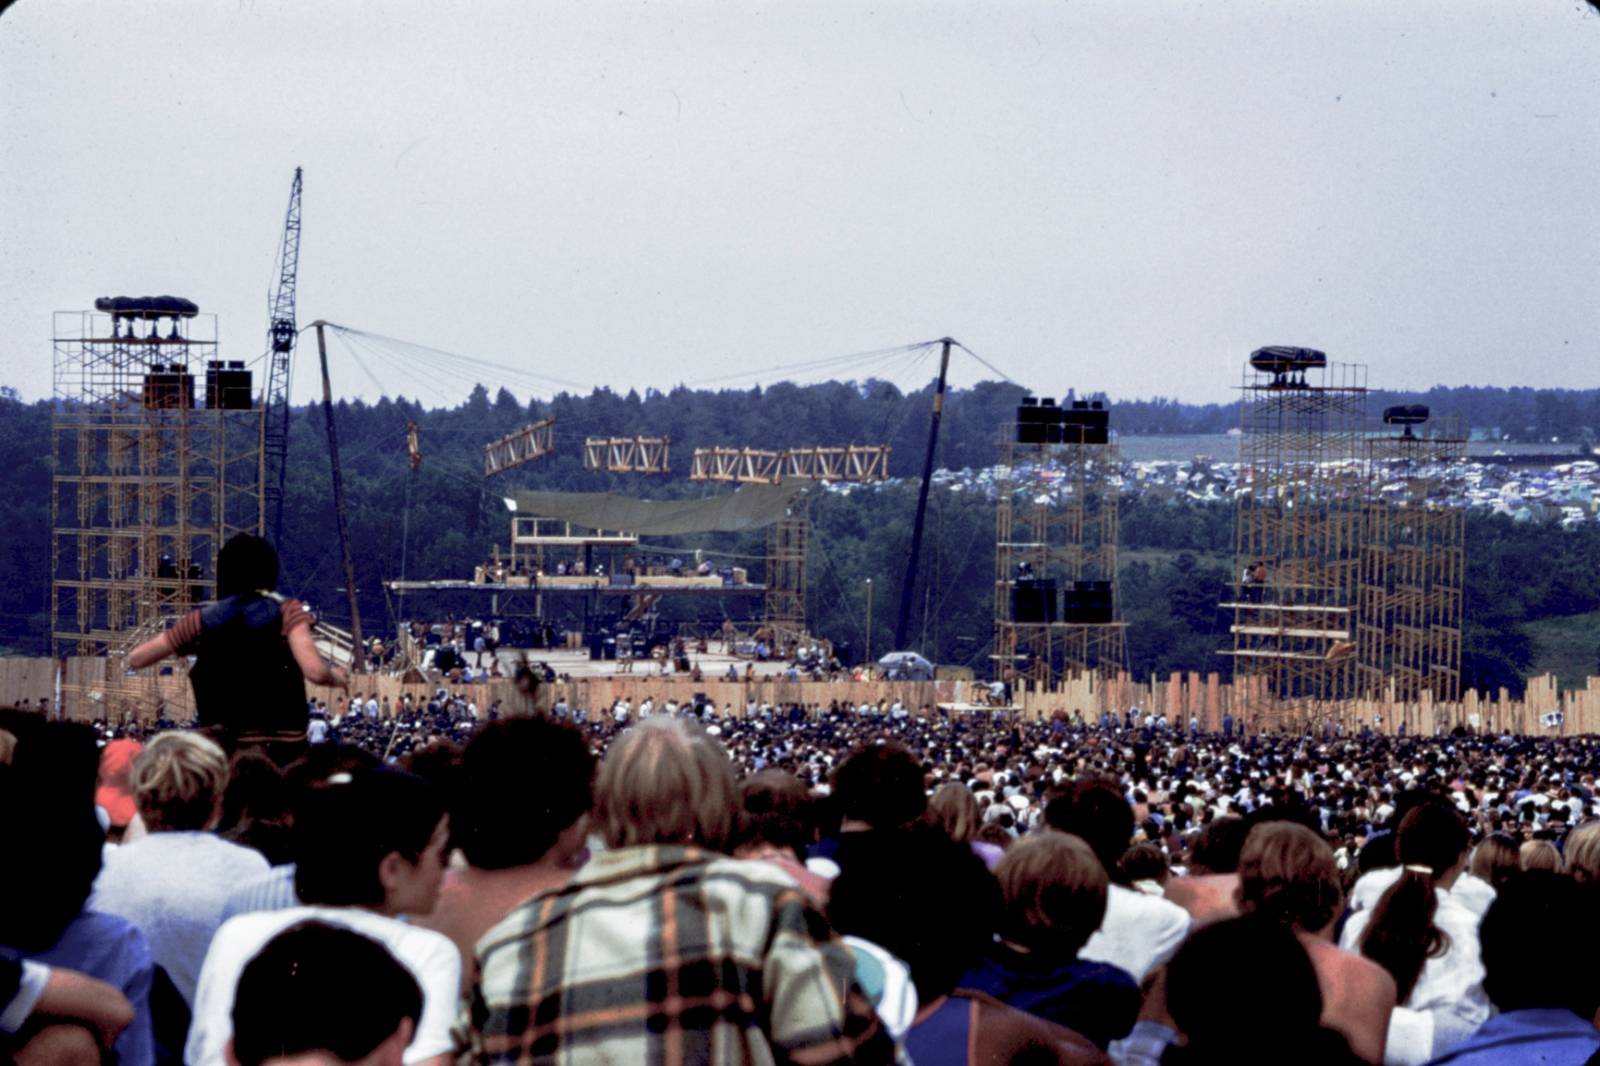 Attendees watch performing artists at the Woodstock Music Festival in August 1969, Bethel, New York, U.S. in this handout image